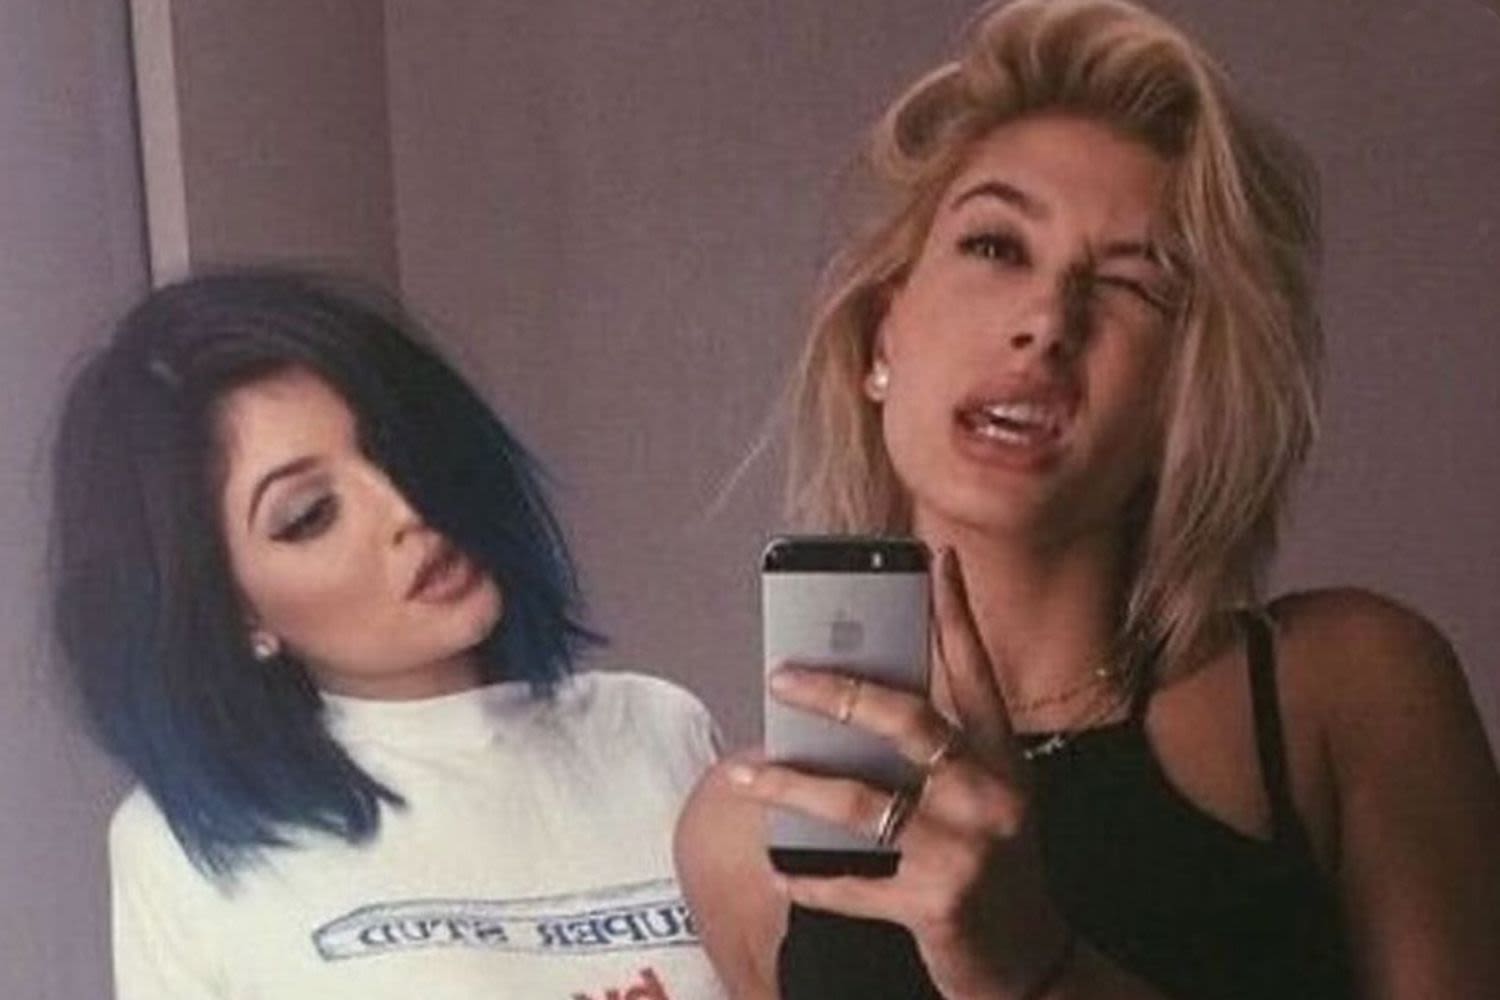 Kylie Jenner Shares Playful Throwback Snap with Hailey Bieber: 'We're Moms Now'